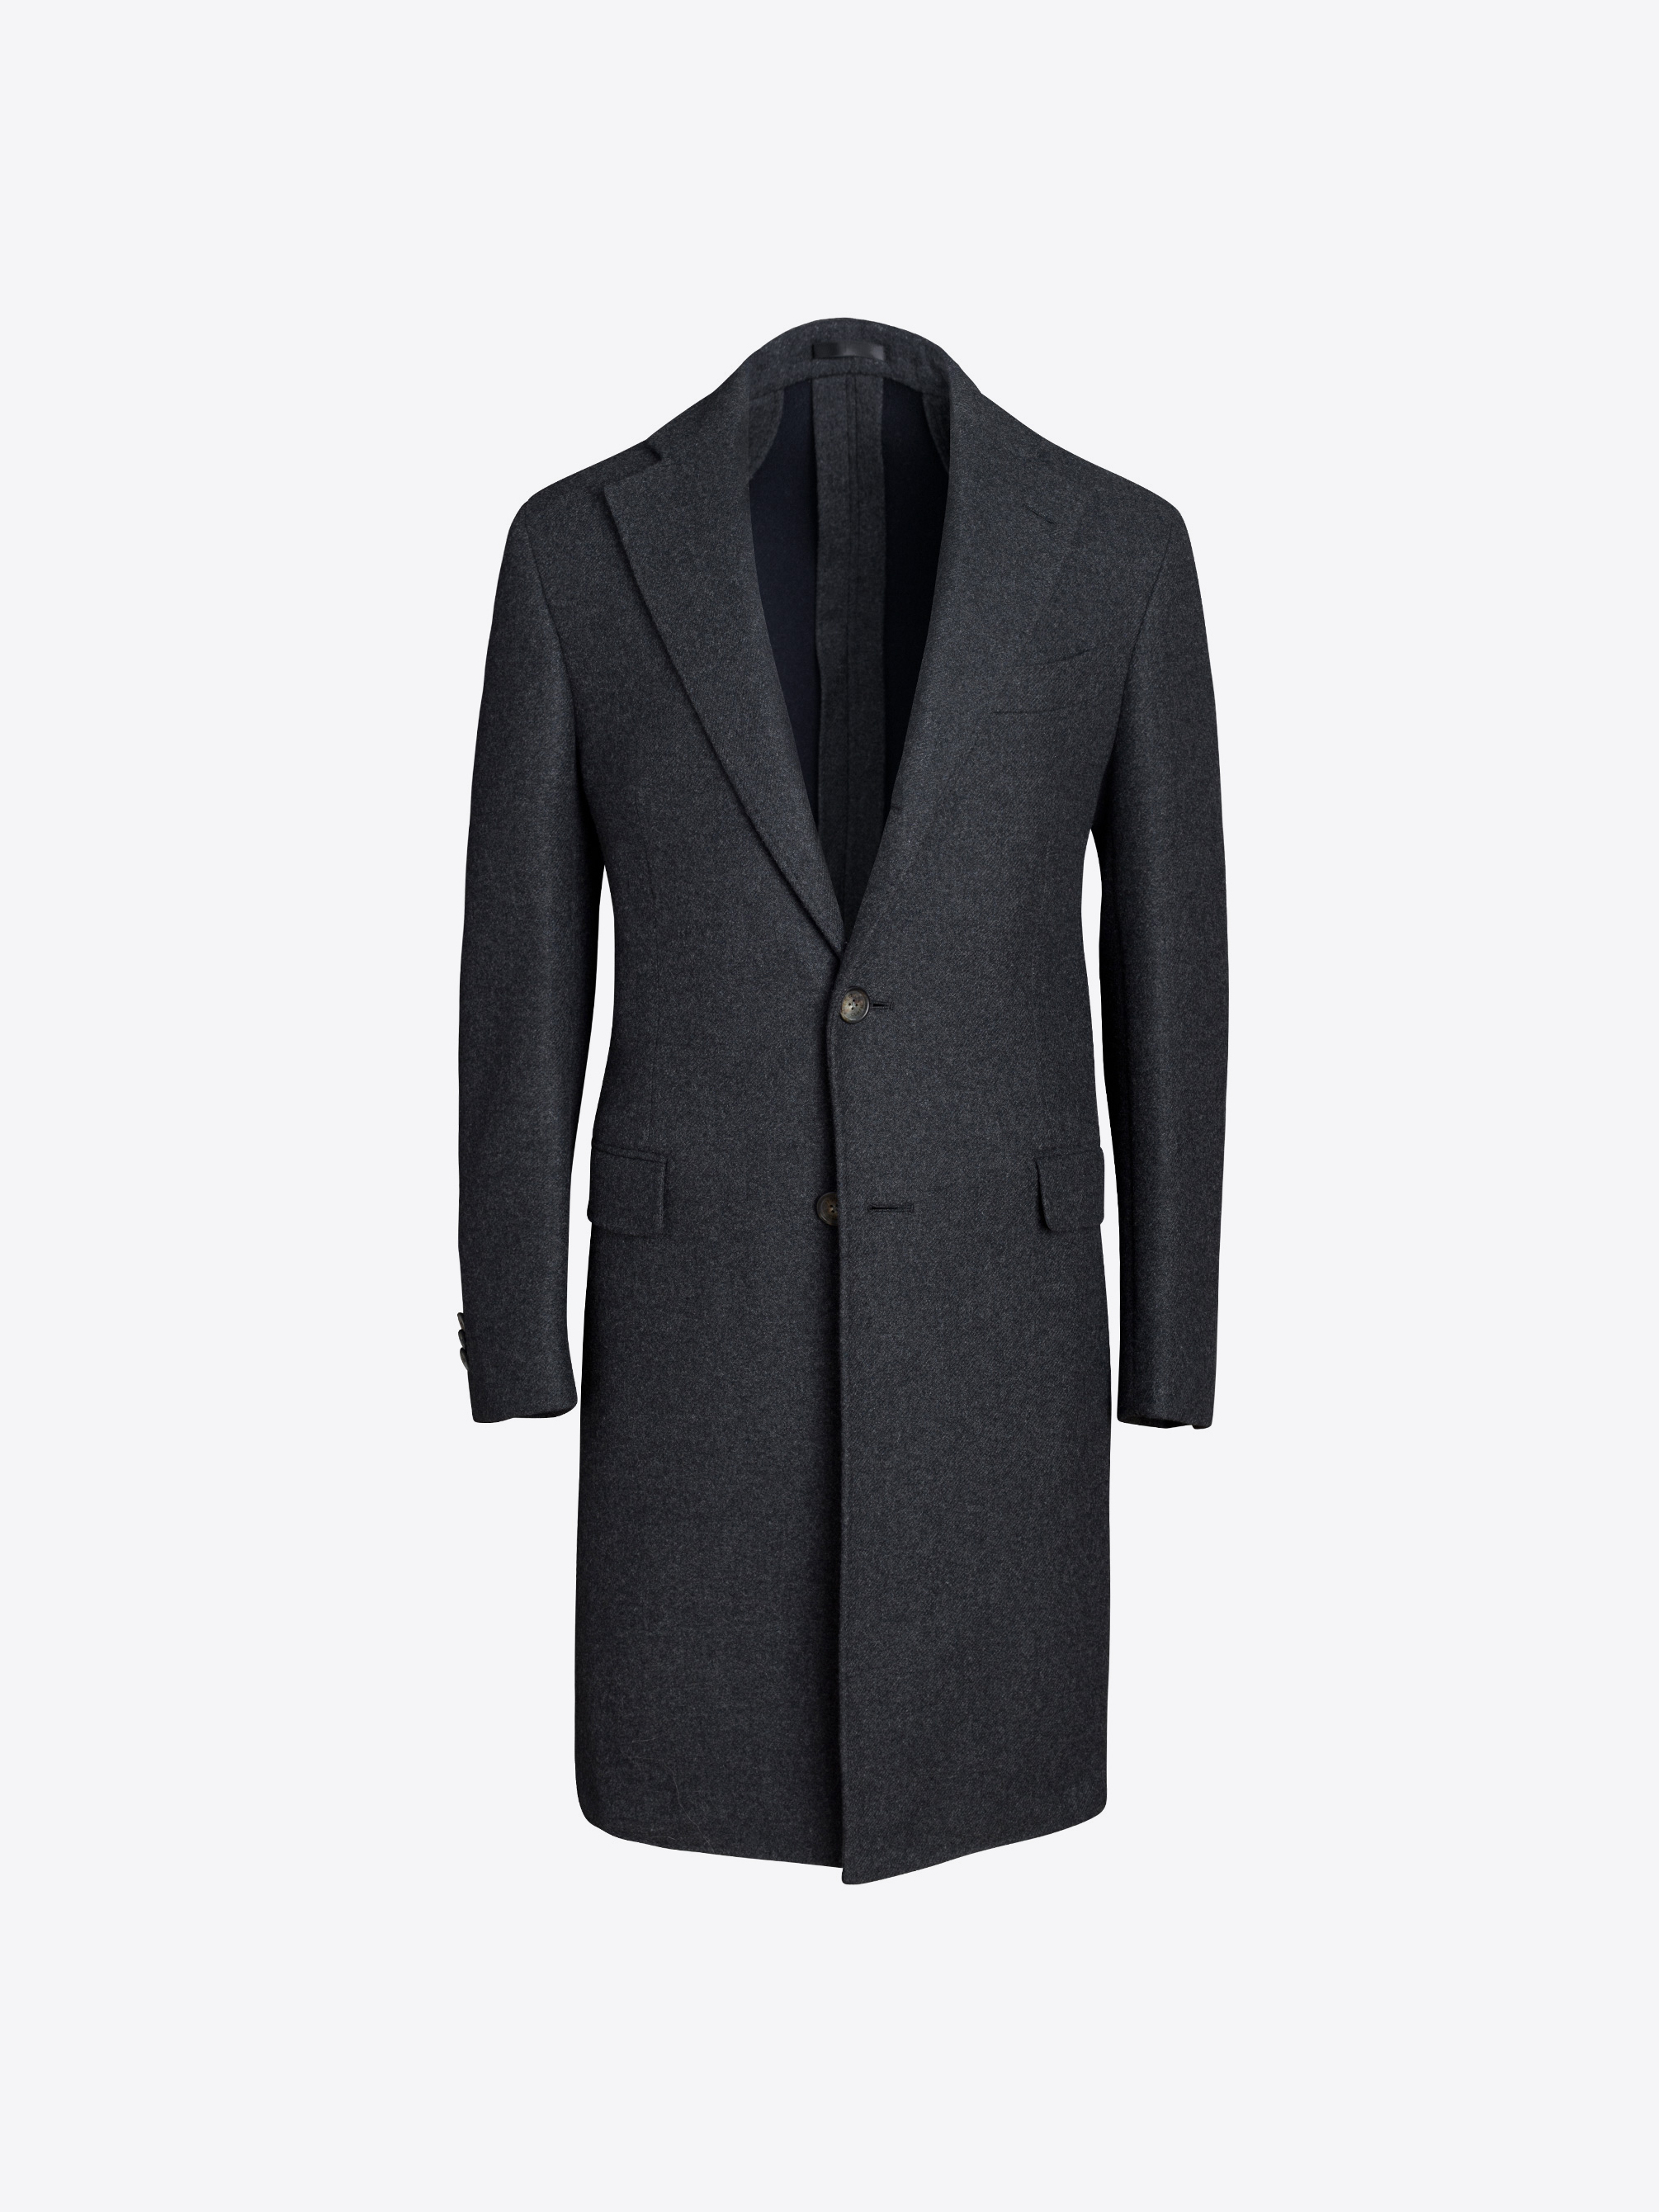 Zoom Image of Bowery Charcoal Wool Unstructured Coat